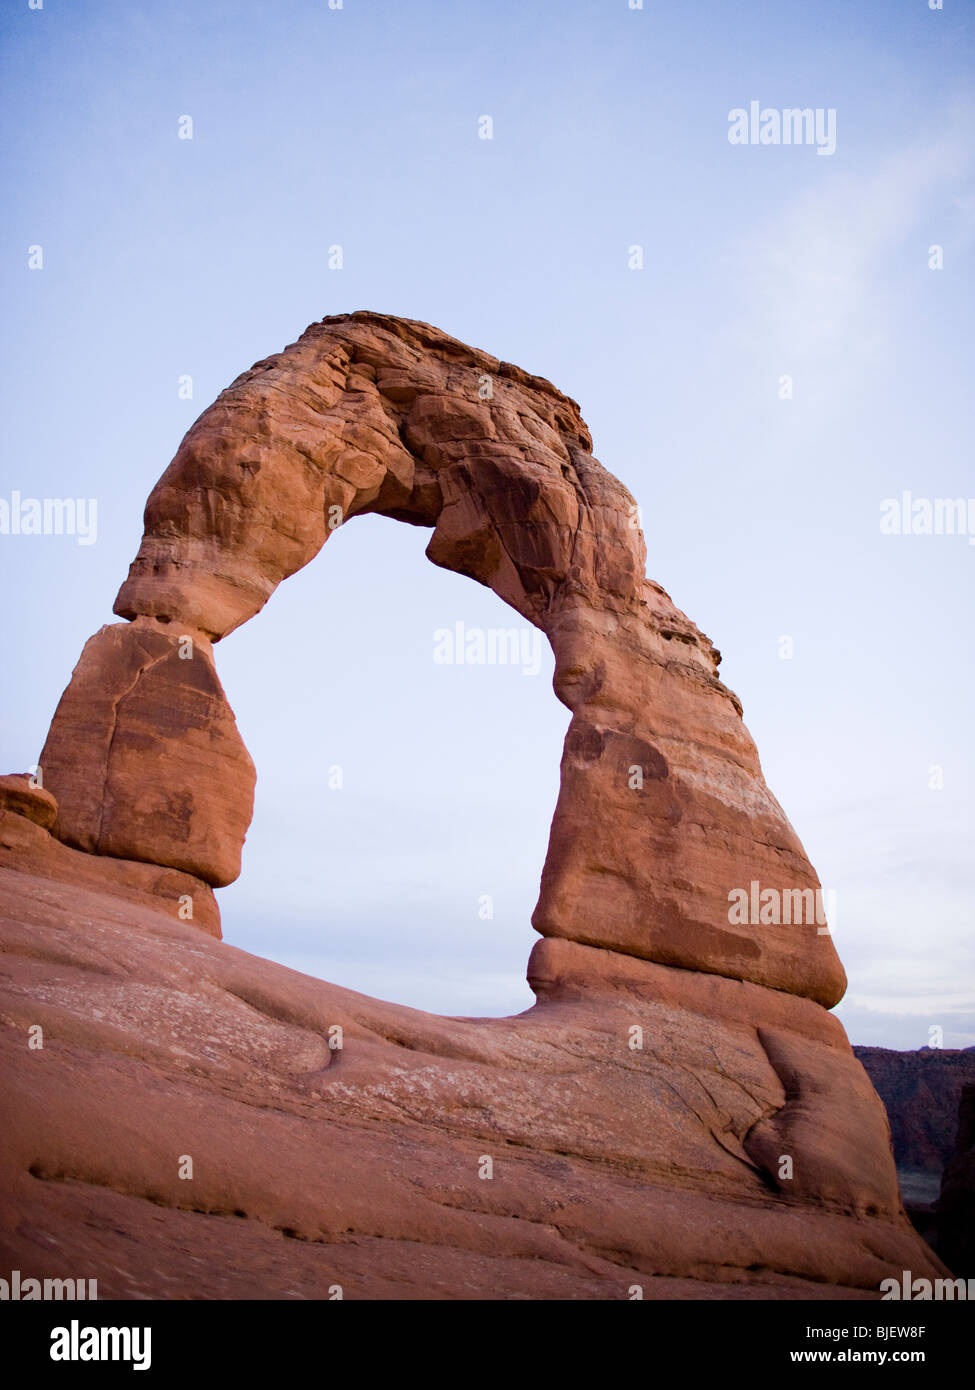 rock archway in the desert Stock Photo